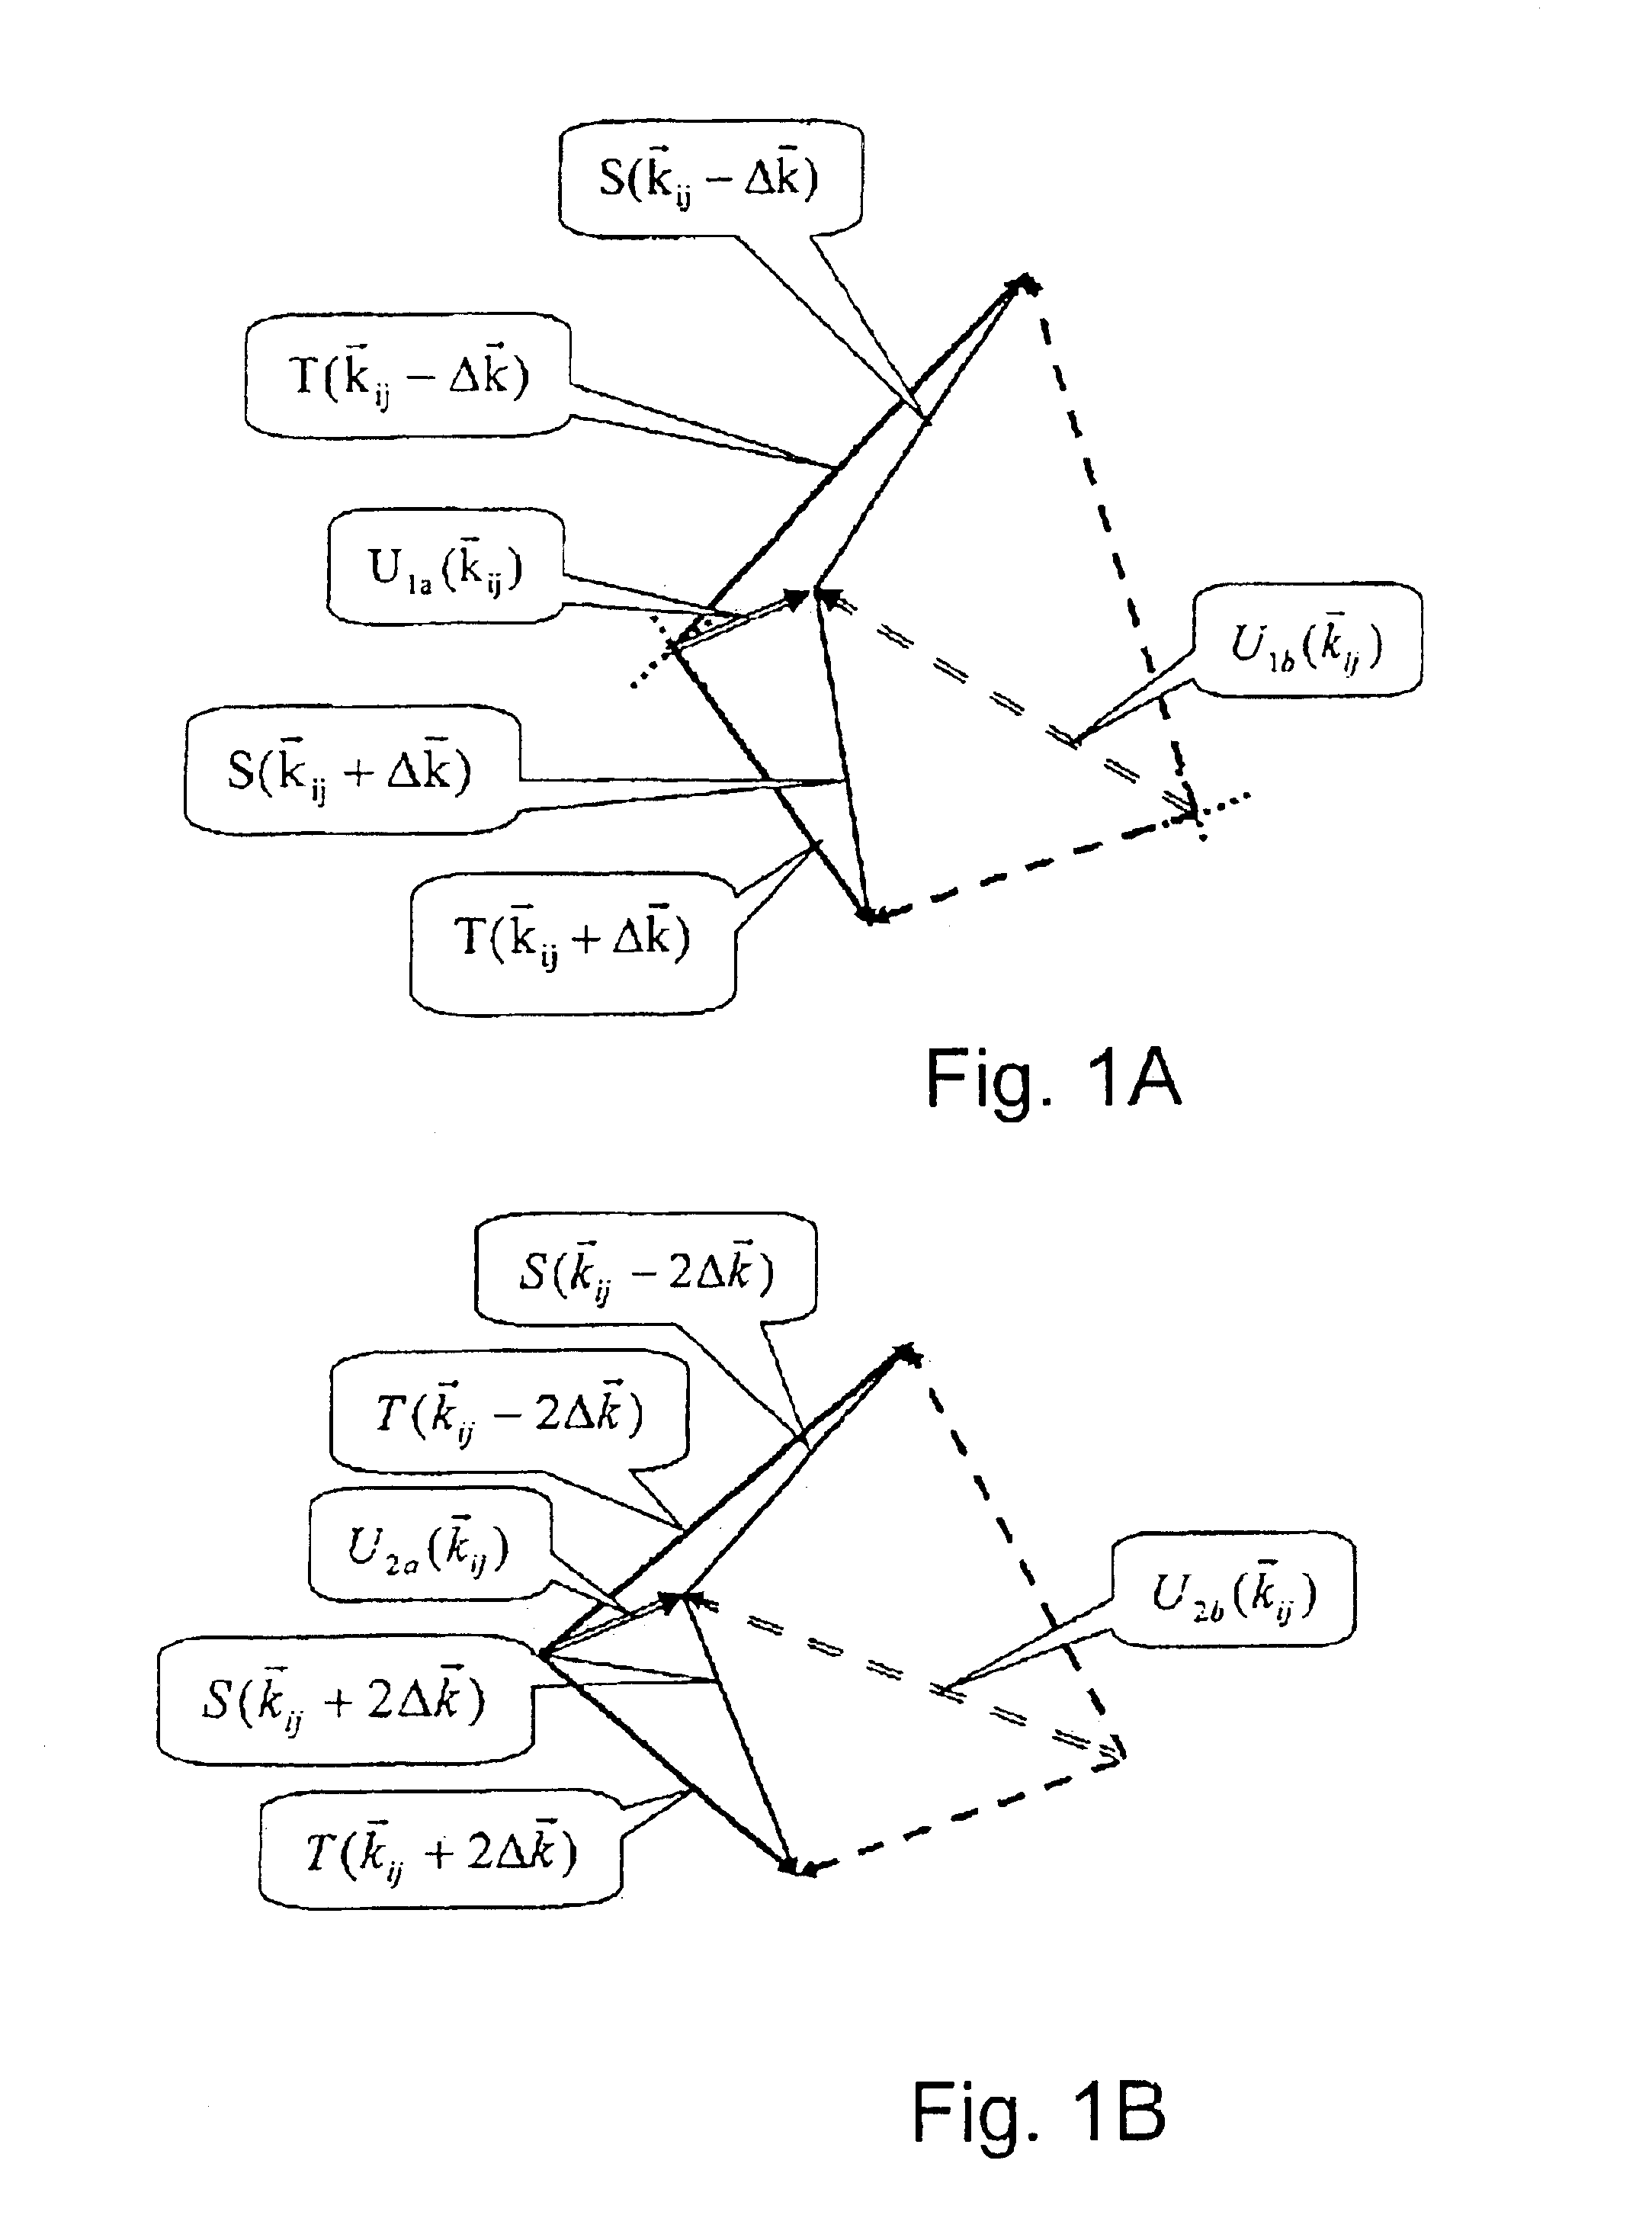 Method to determine the three-dimensional atomic structure of molecules